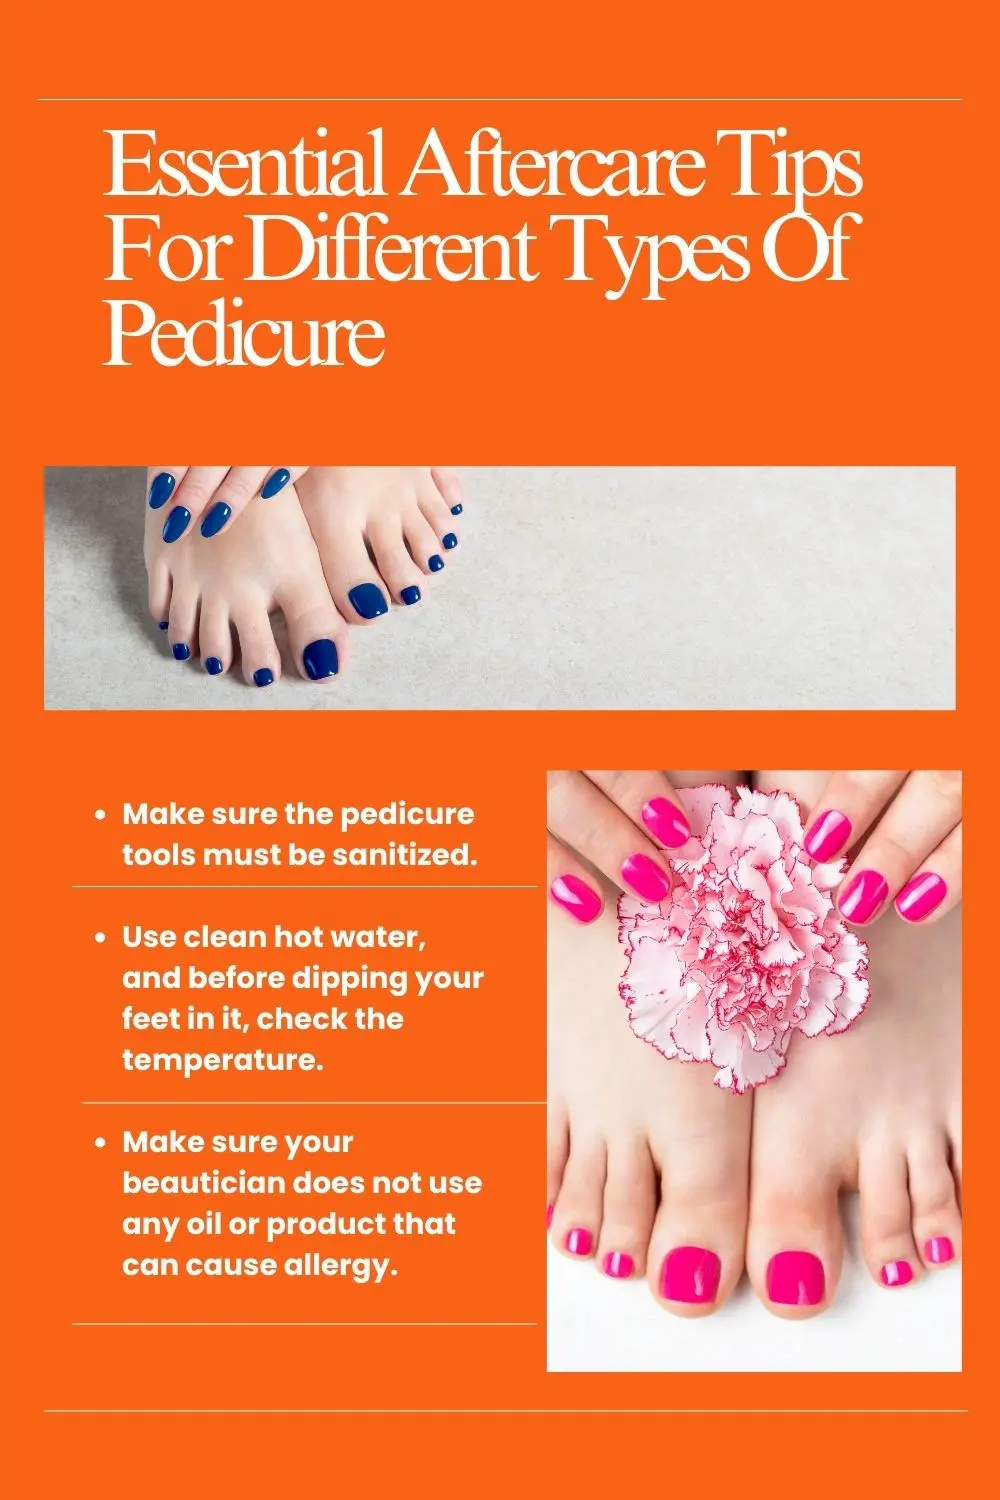 Essential Aftercare Tips For Different Types Of Pedicure